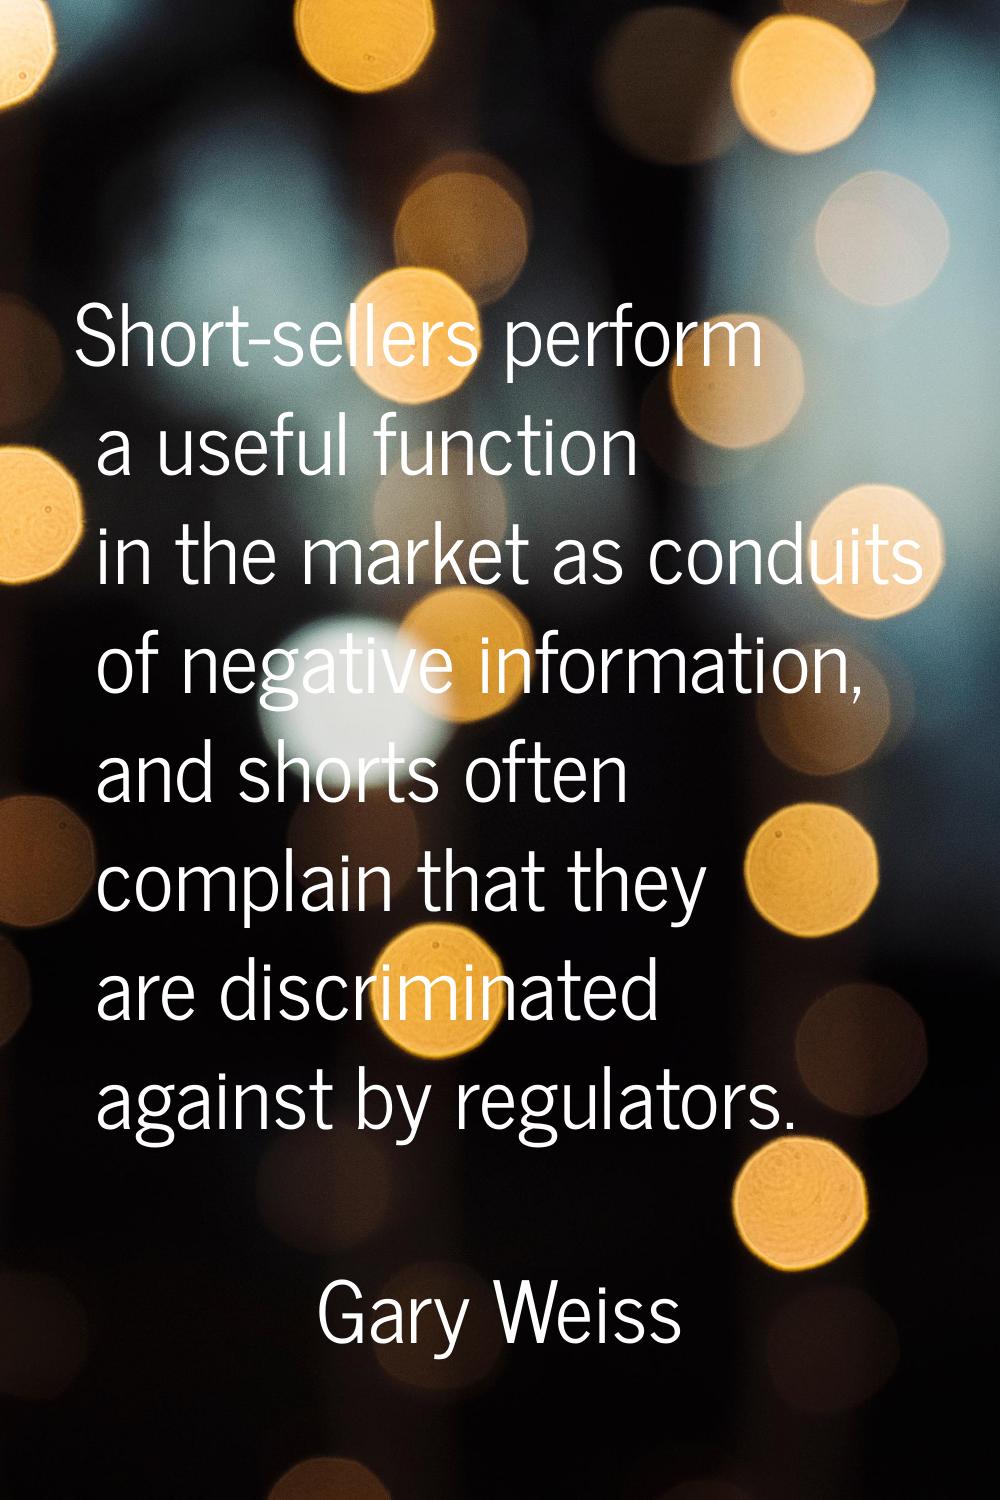 Short-sellers perform a useful function in the market as conduits of negative information, and shor